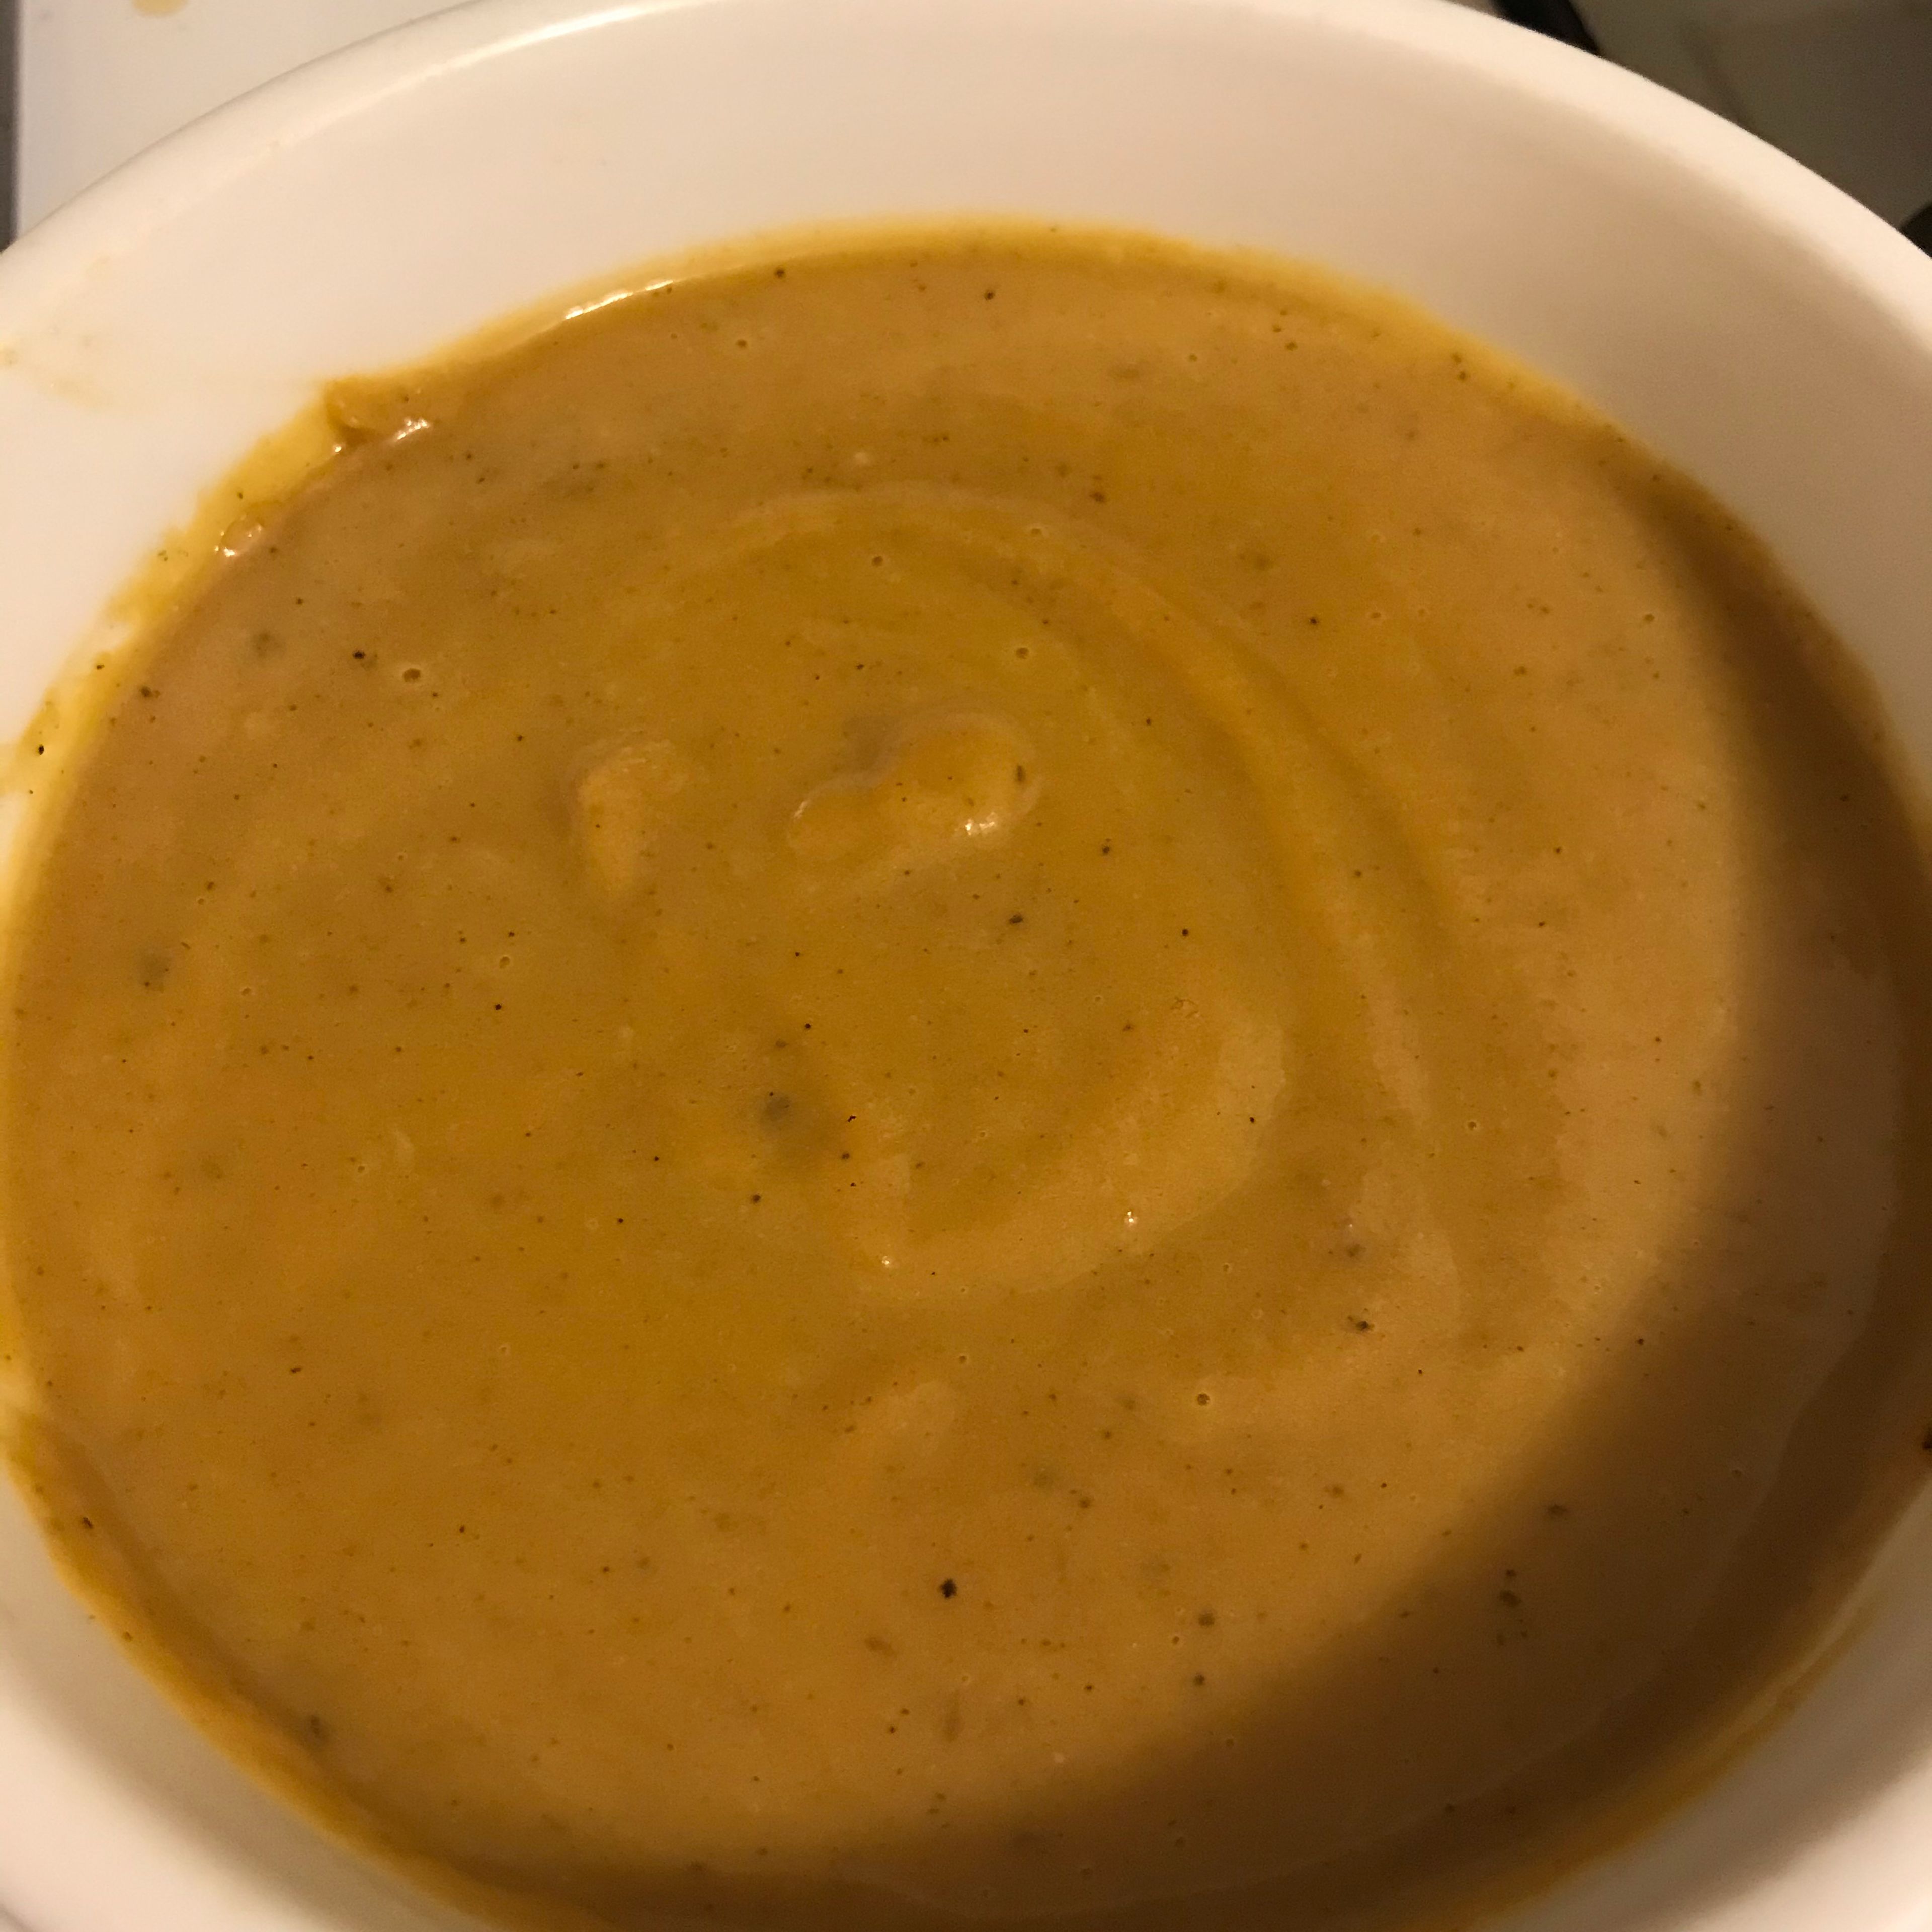 Once the ingredients have come together, remove saucepan from heat. Let the soup cool slightly before puréeing with an immersion blender, food processor, or blender in batches. Soup should be a creamy thickness. Enjoy!